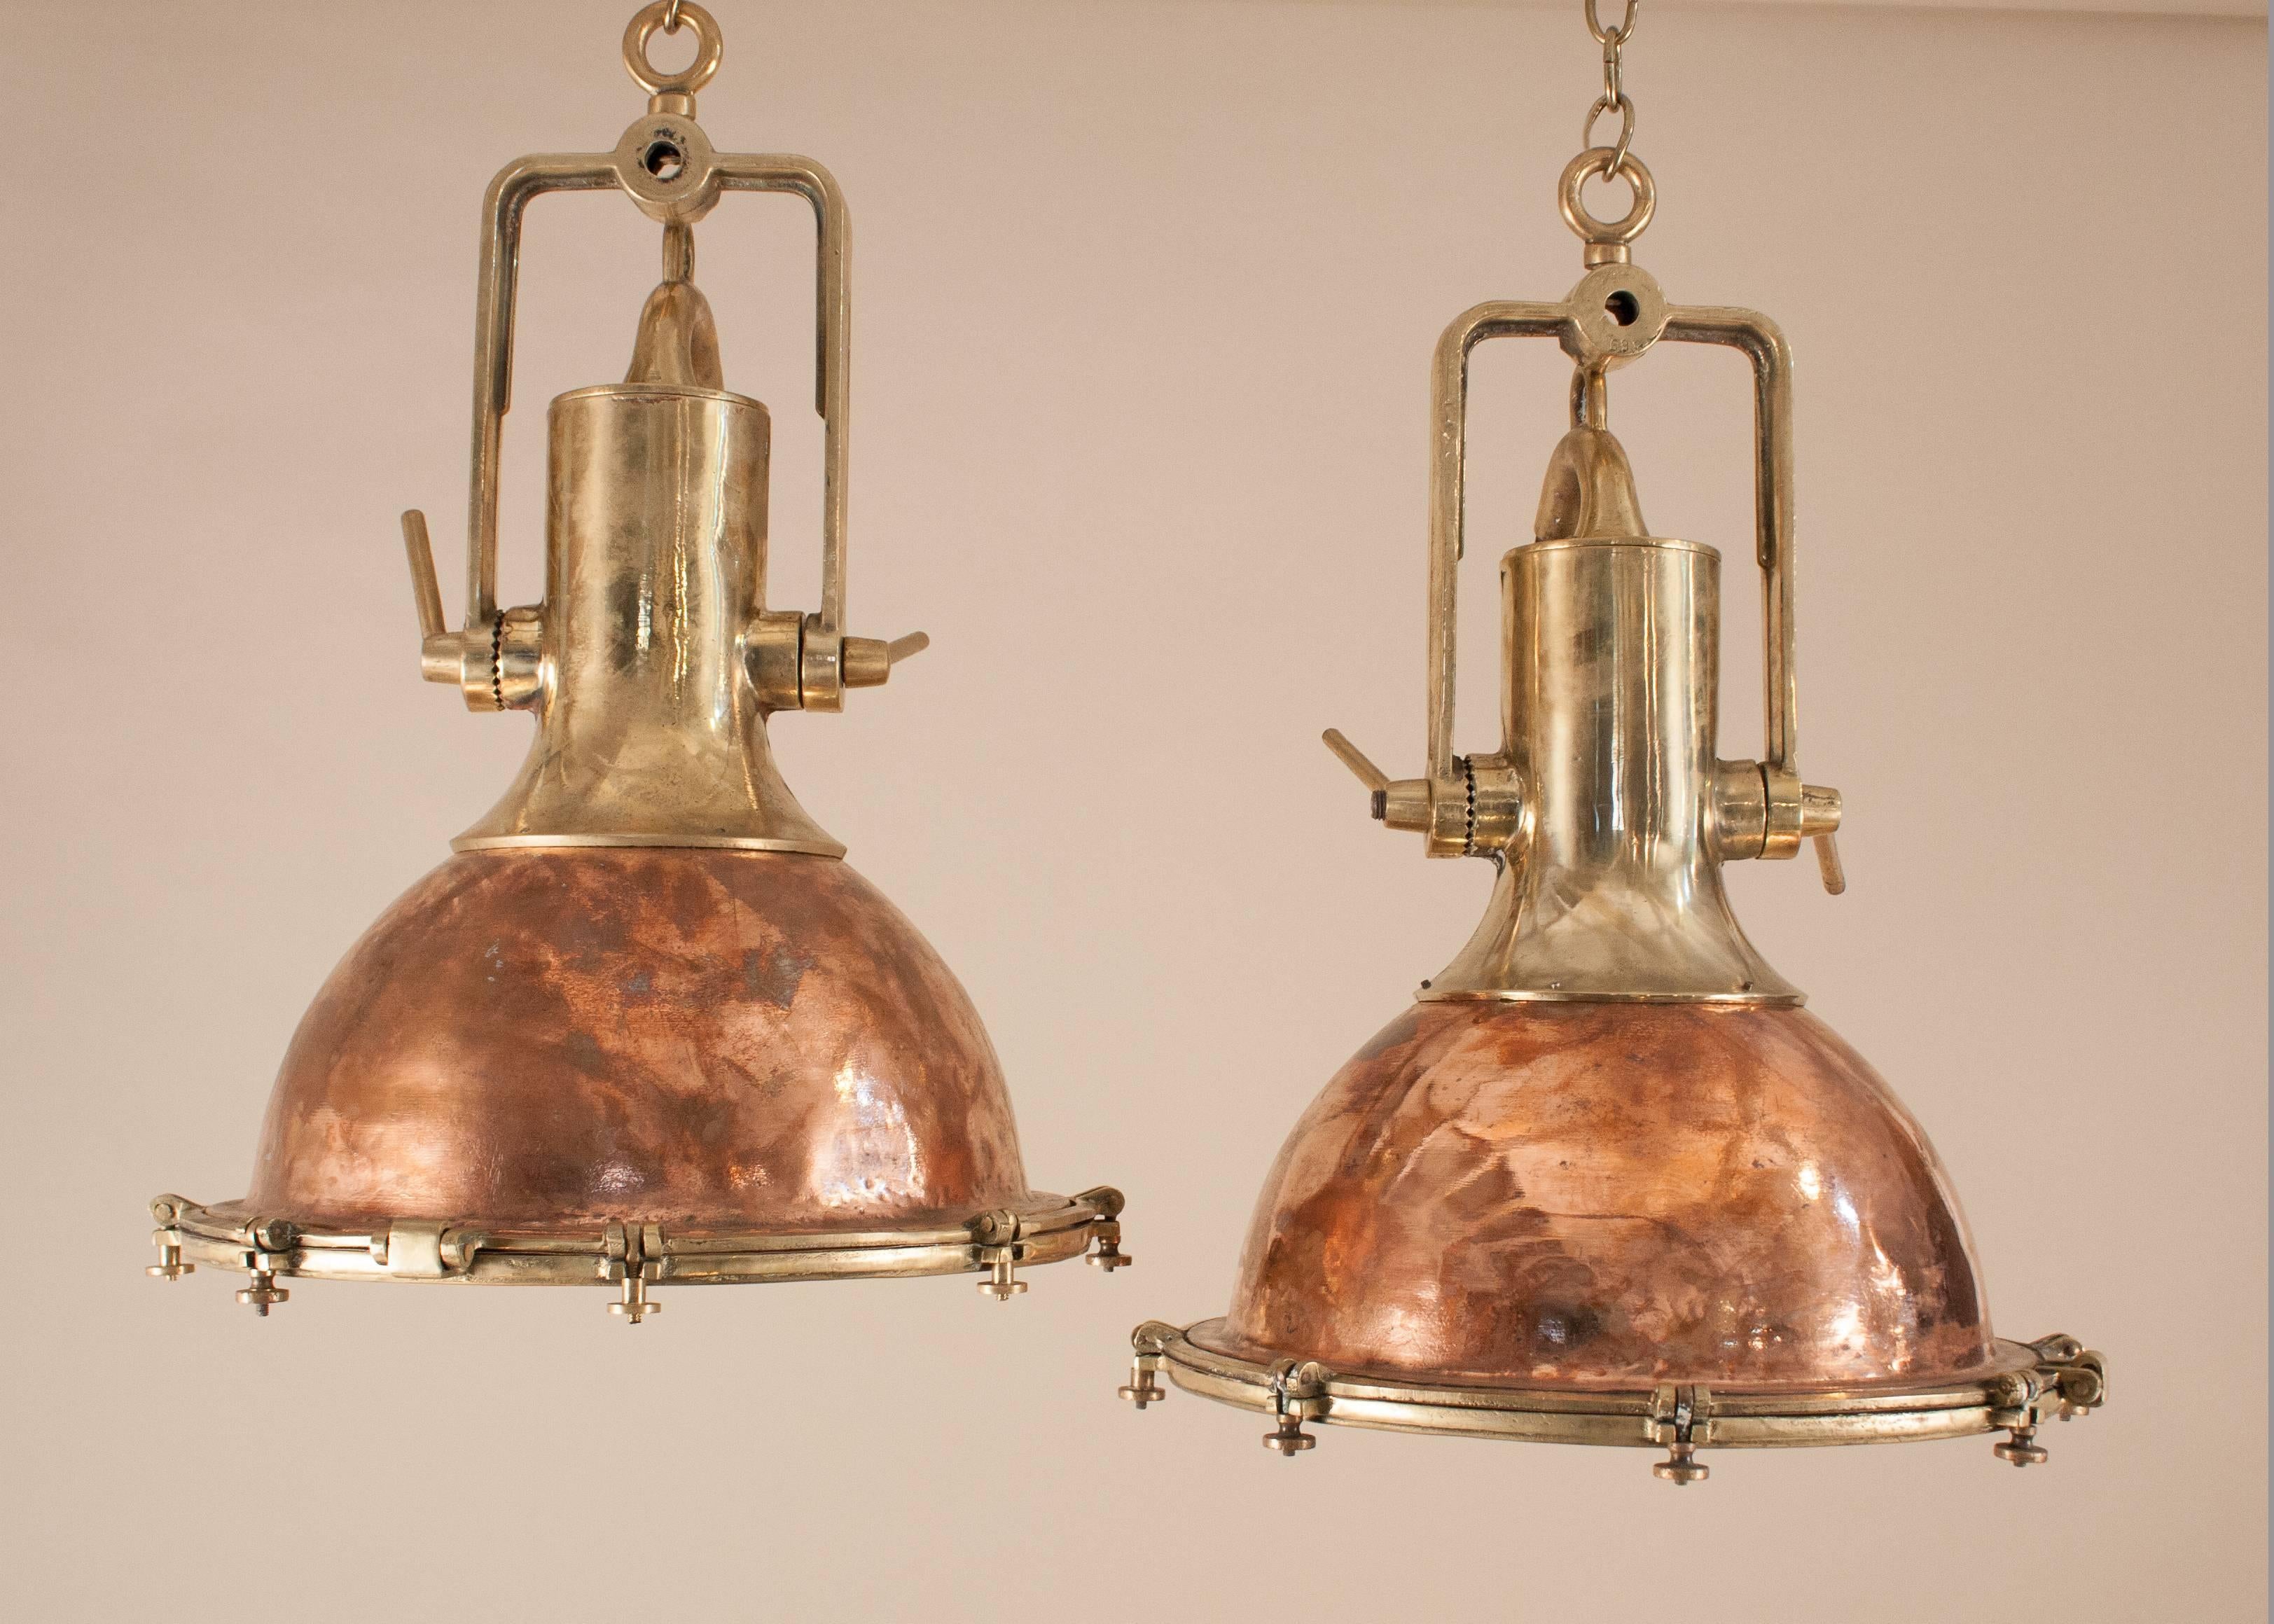 An authentic pair of large 1950s copper and brass ship's deck lights with superb form and patina. Salvaged from a maritime vessel and attentively restored to near-original condition, these nautical pendants suspend from adjustable solid brass